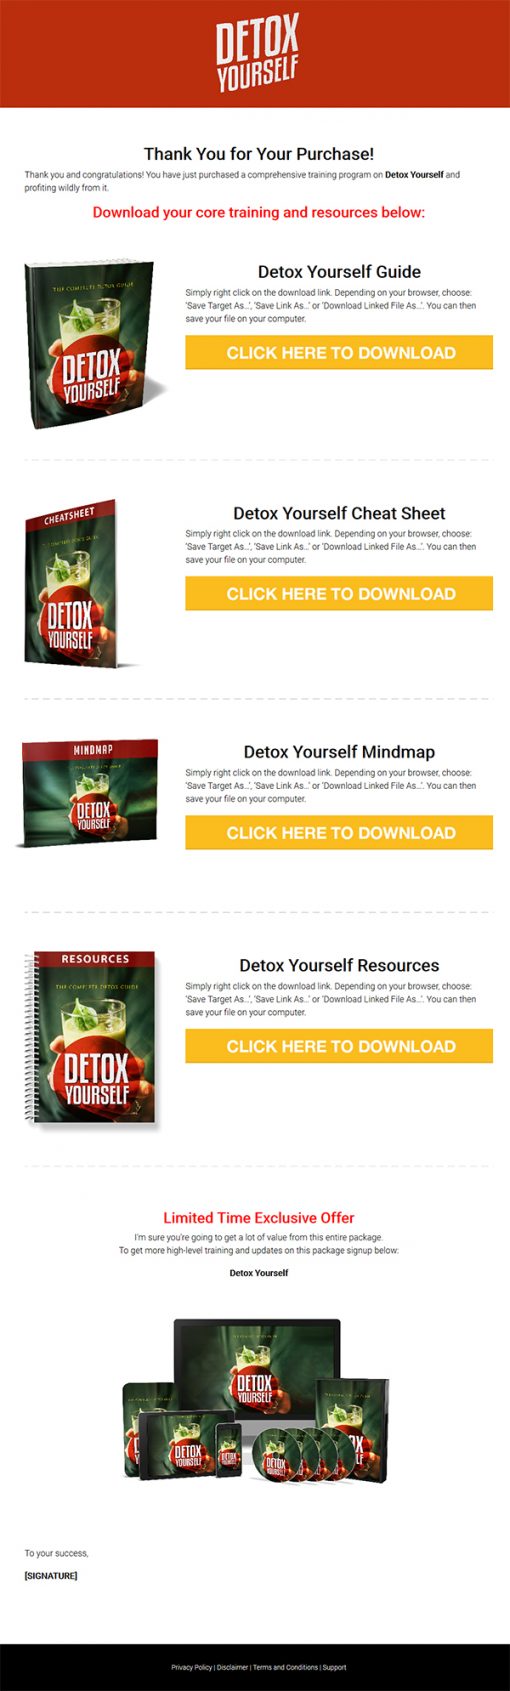 Detox Yourself Ebook and Videos MRR